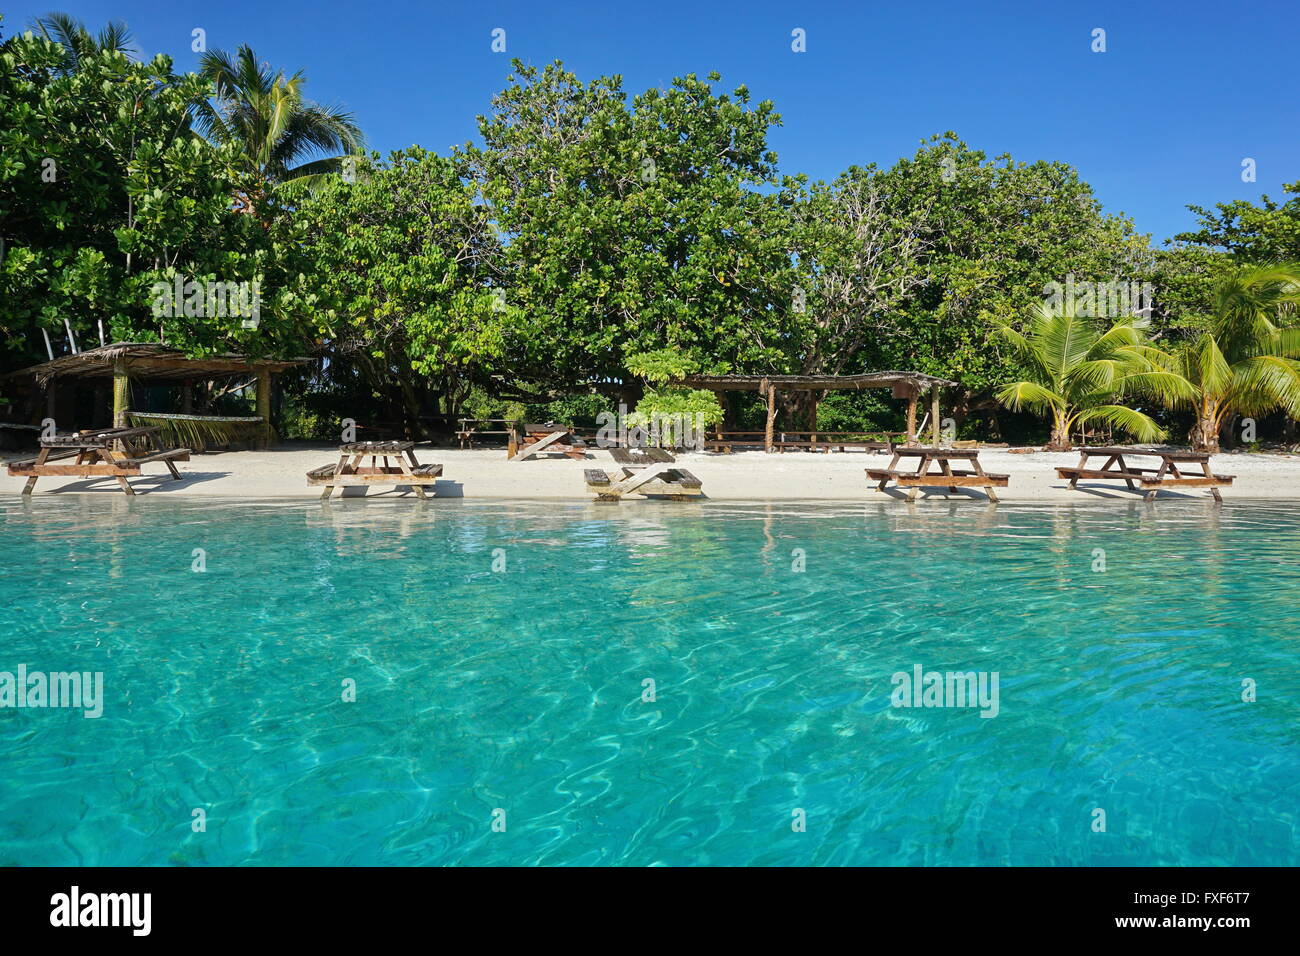 Picnic tables on a tropical beach with turquoise water on the shore of an islet, Huahine island, French Polynesia Stock Photo